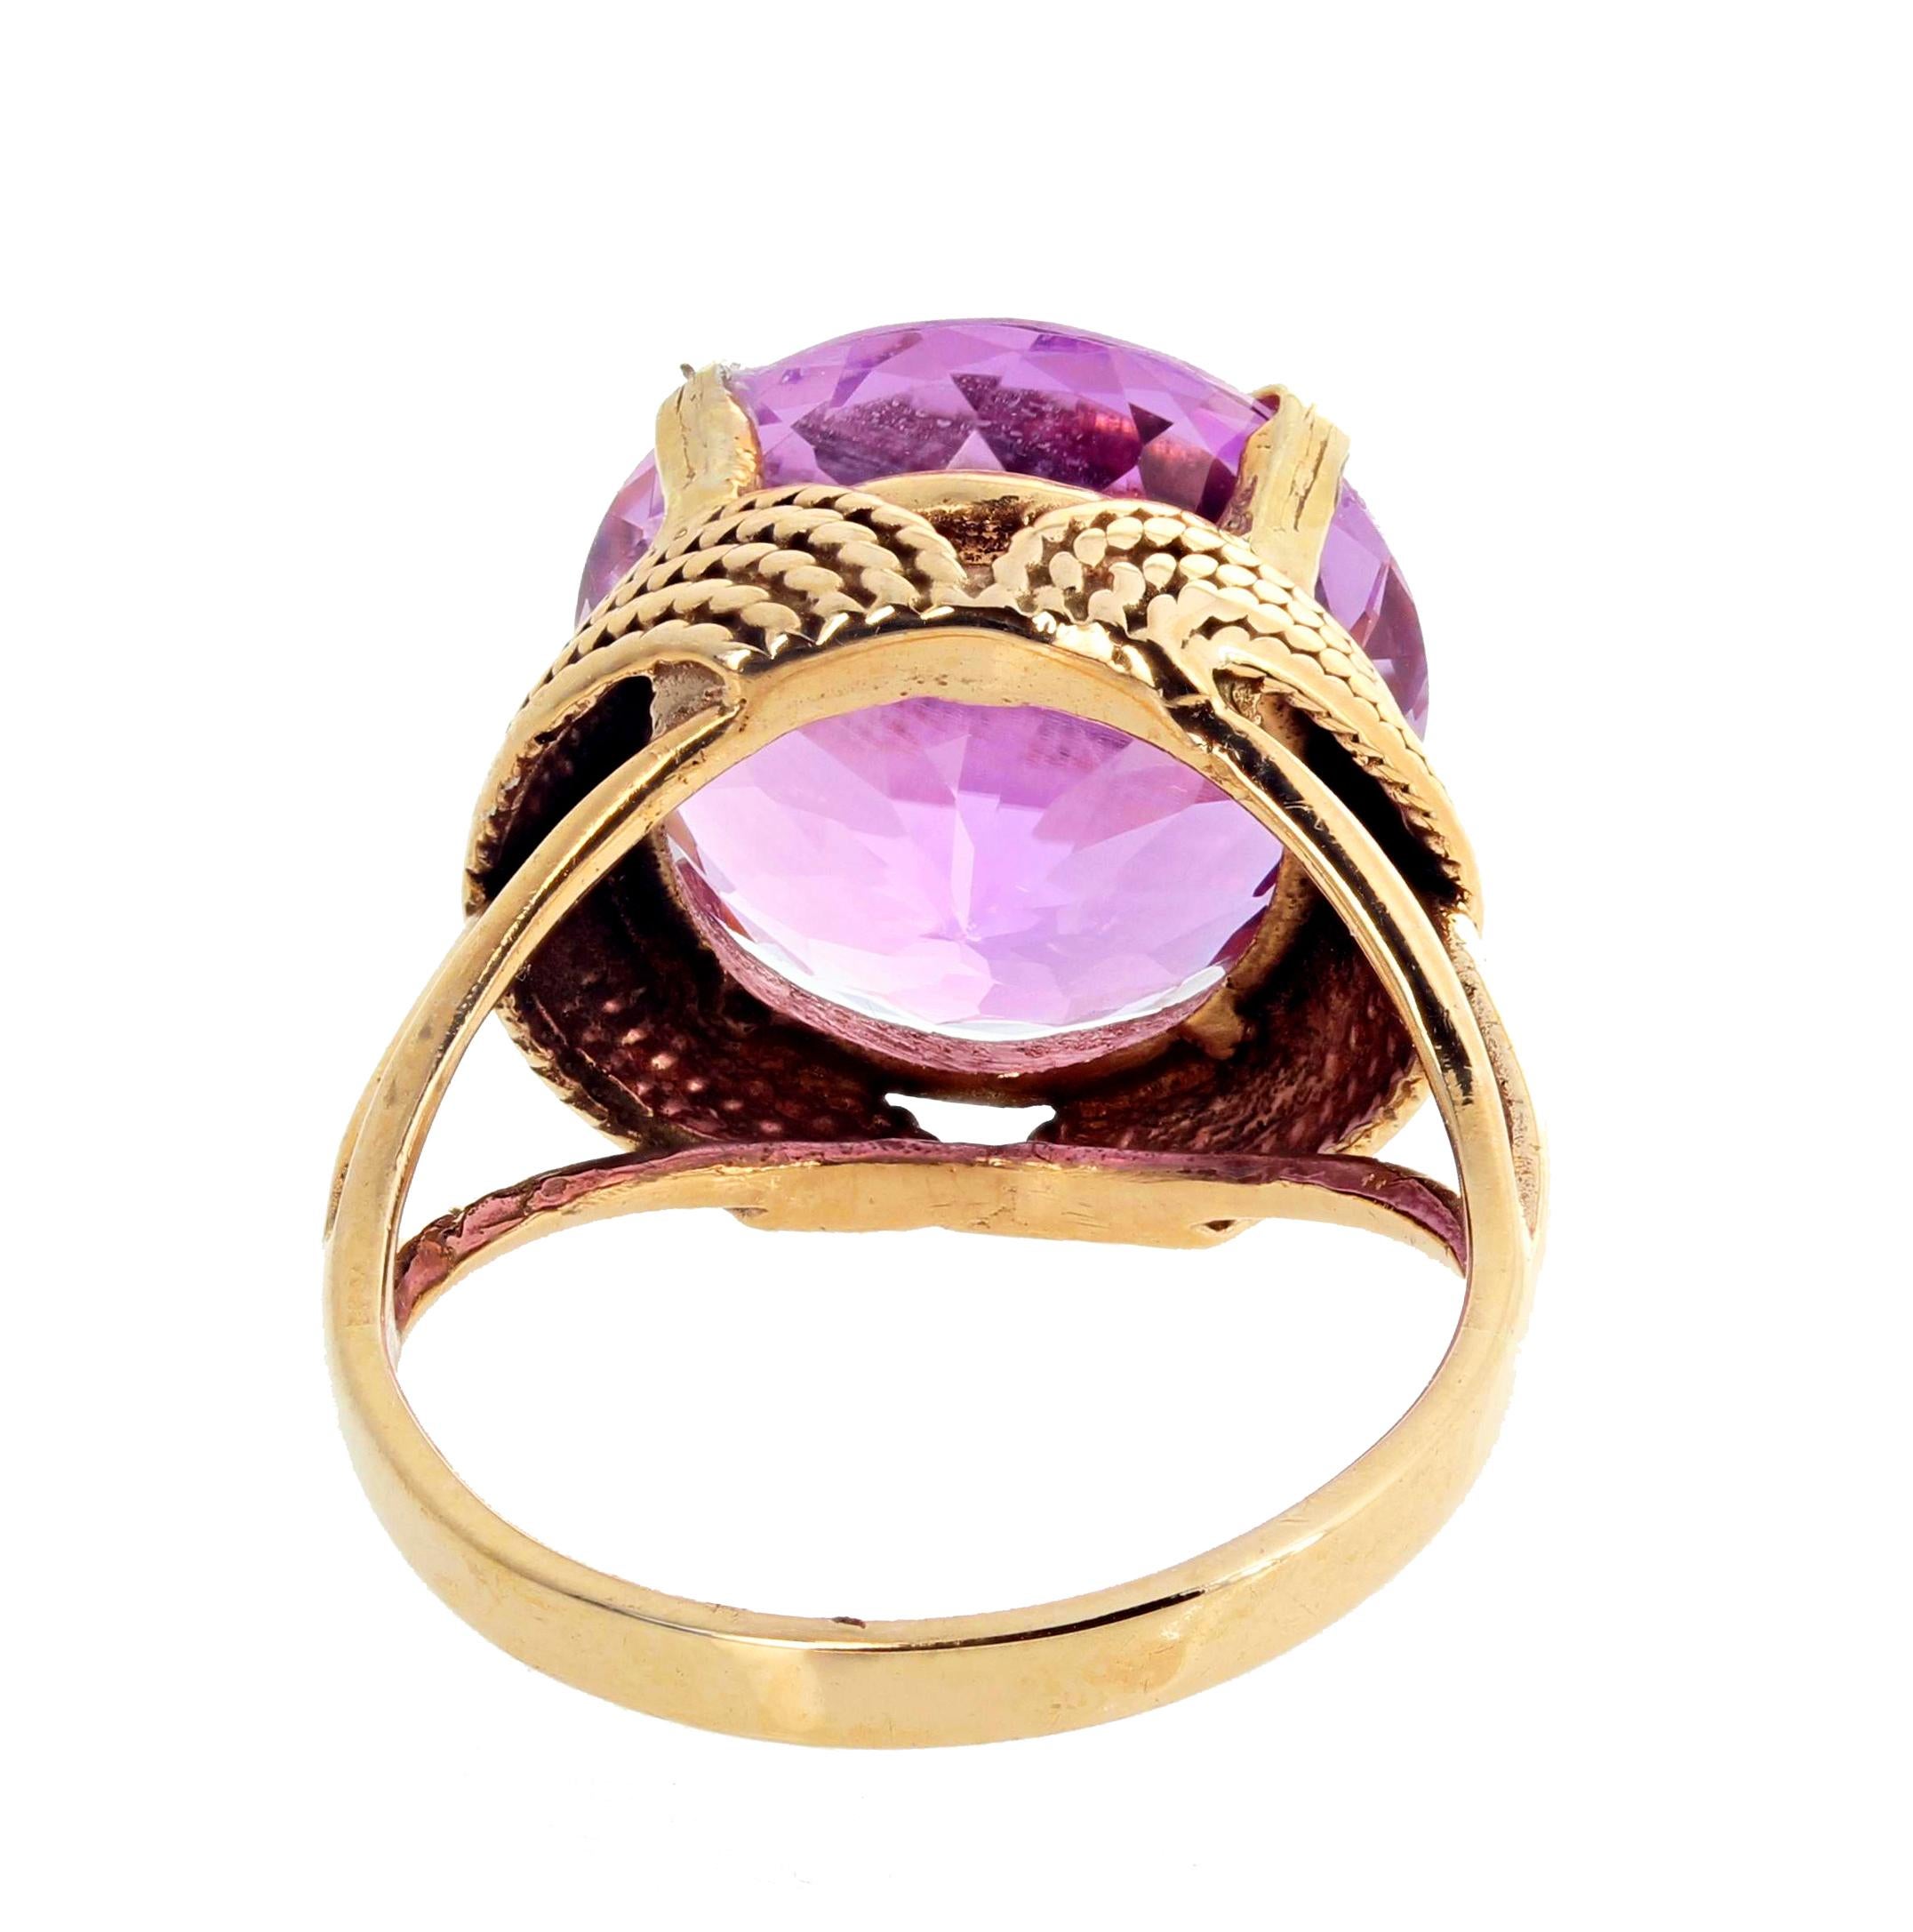 AJD Extraordinary Rare 14.51Ct Natural Kunzite 14Kt Gold Cocktail Ring In New Condition For Sale In Raleigh, NC